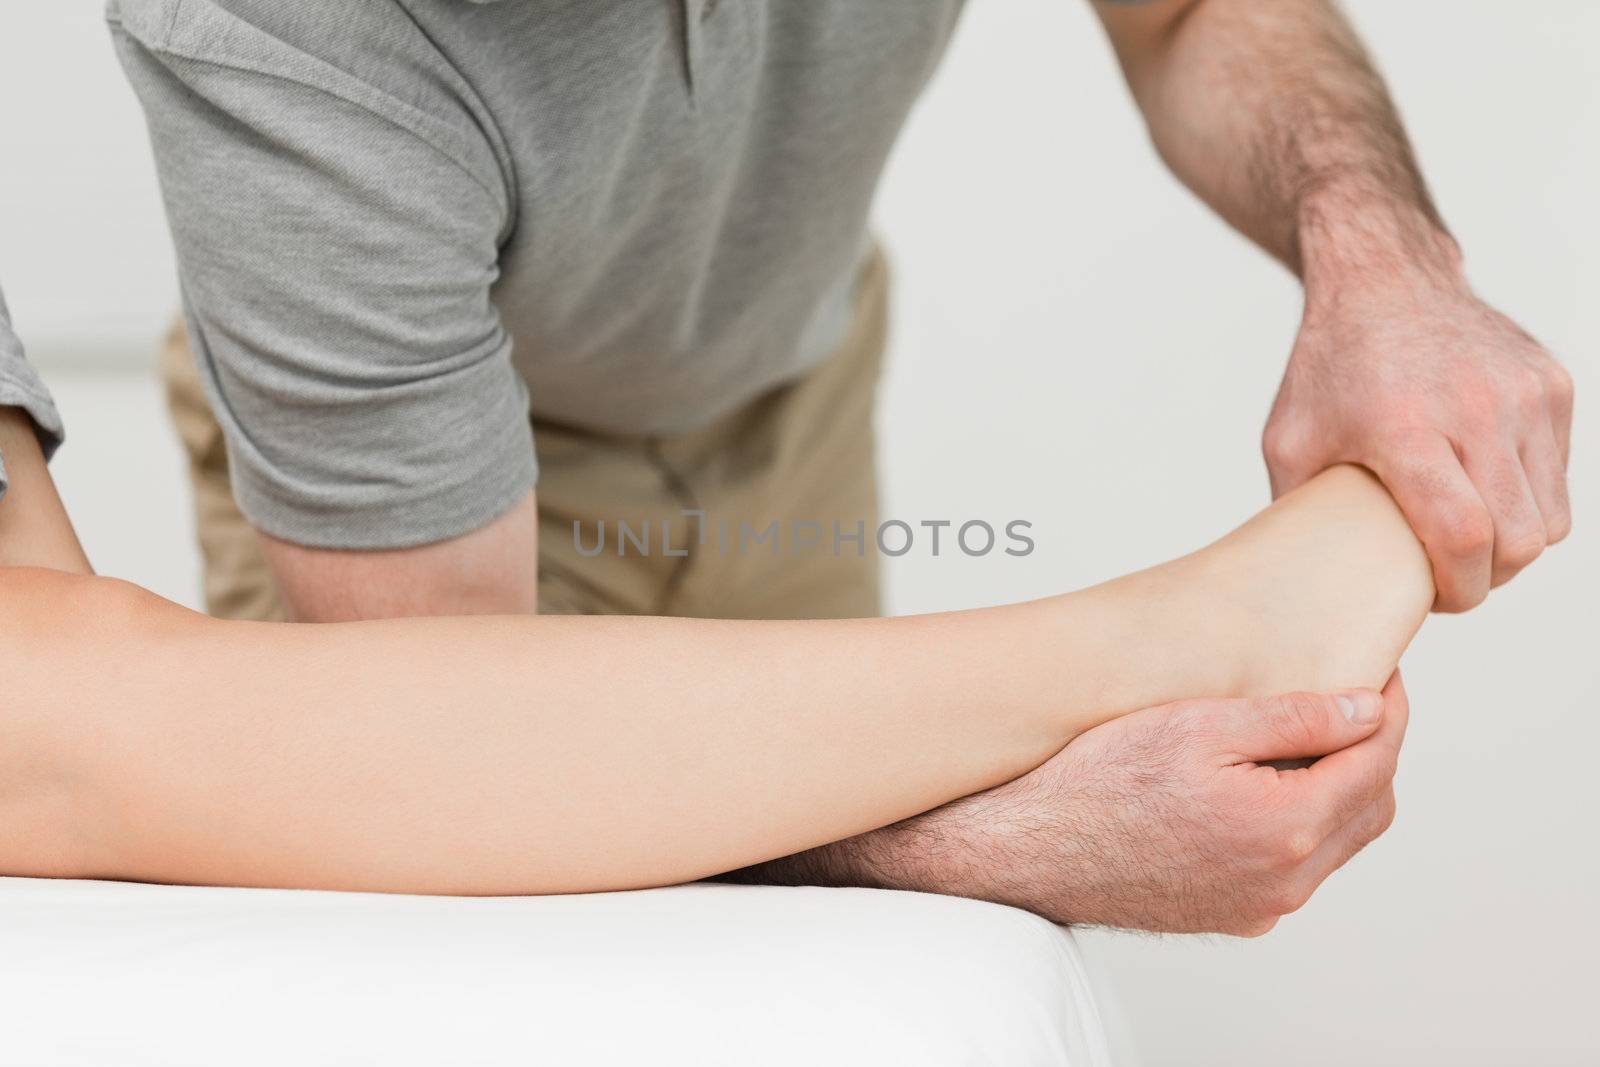 Physiotherapist stretching the ankle of a patient in a room